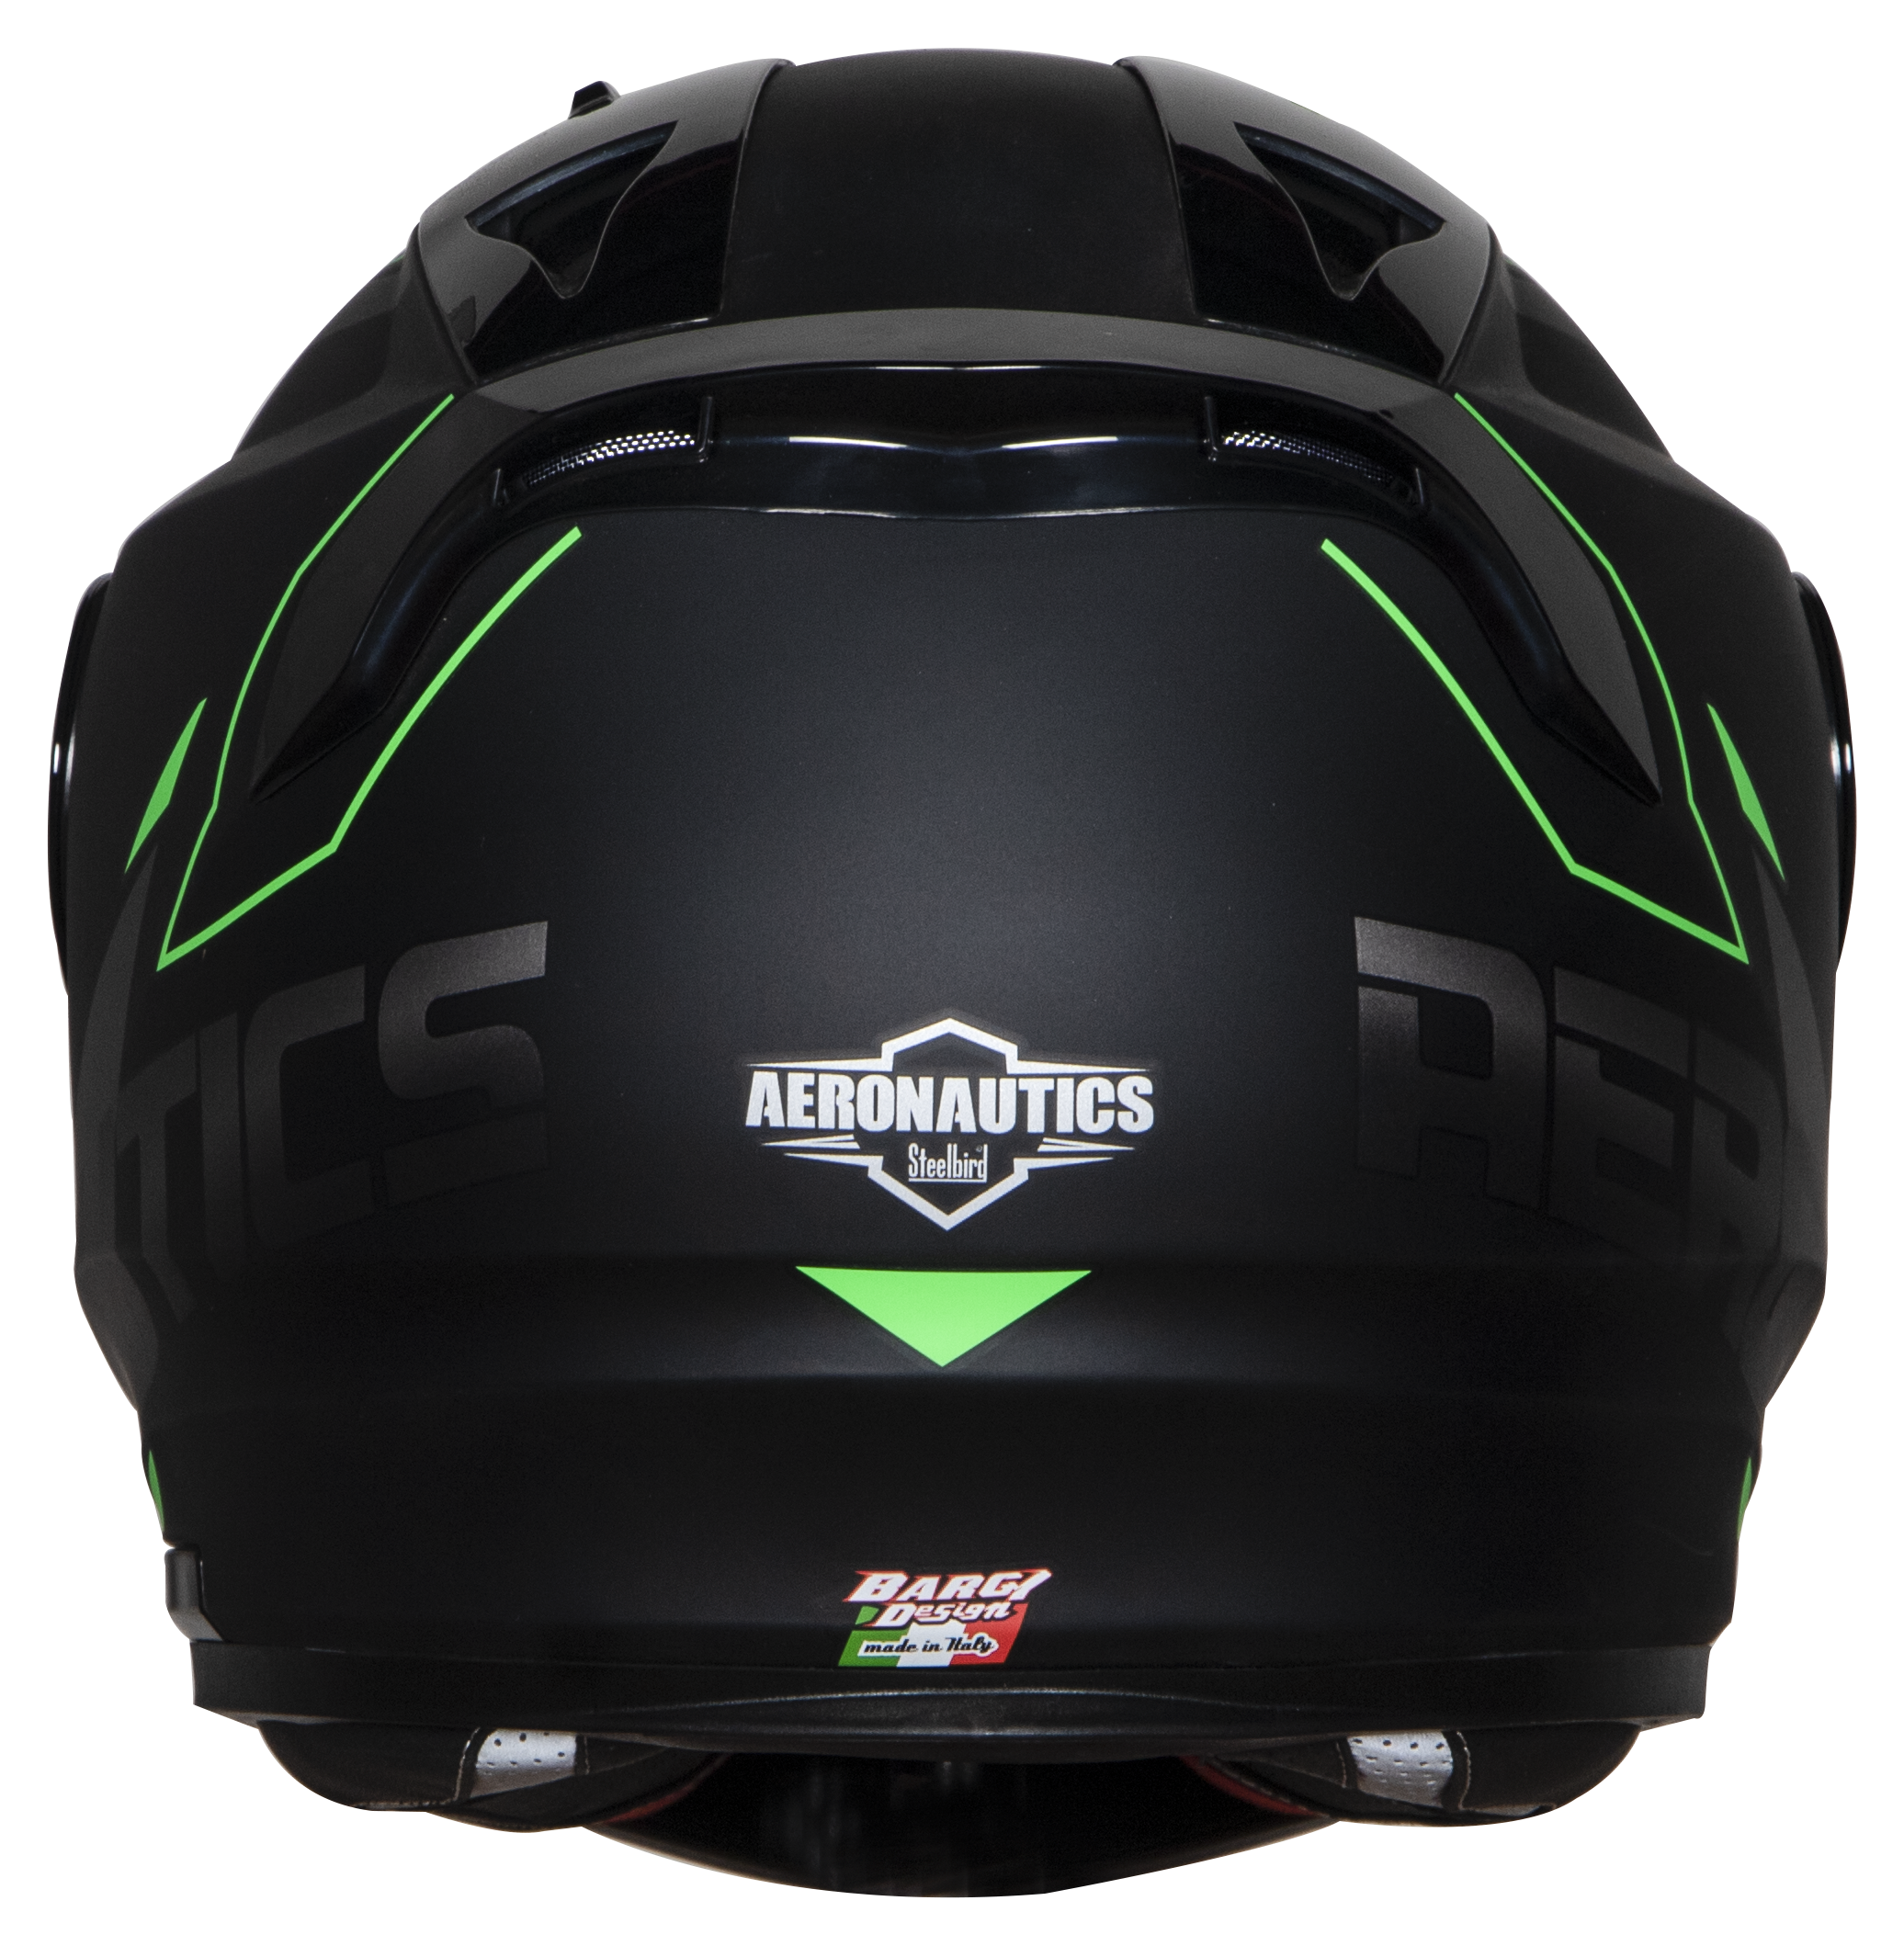 SA-1 RTW Mat Black With Green (Fitted With Clear Visor Extra Night Vision Blue Visor Free)